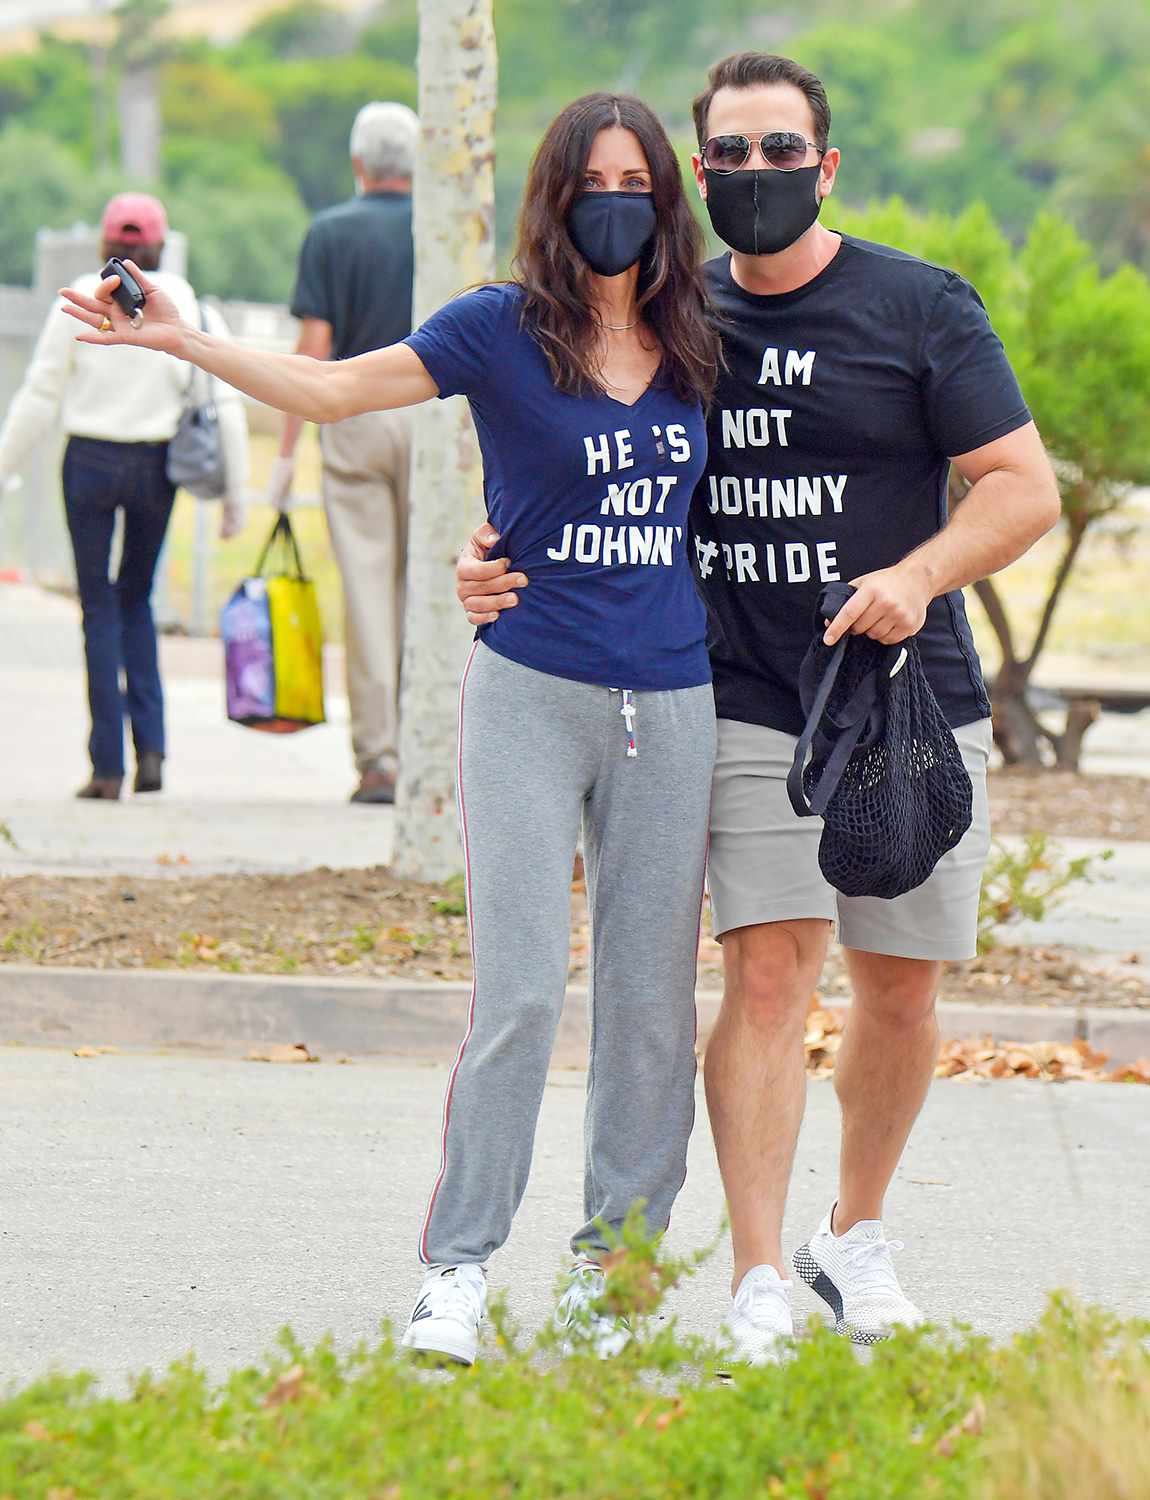 Courteney Cox makes it clear that the guy she's with is NOT Johnny McDaid